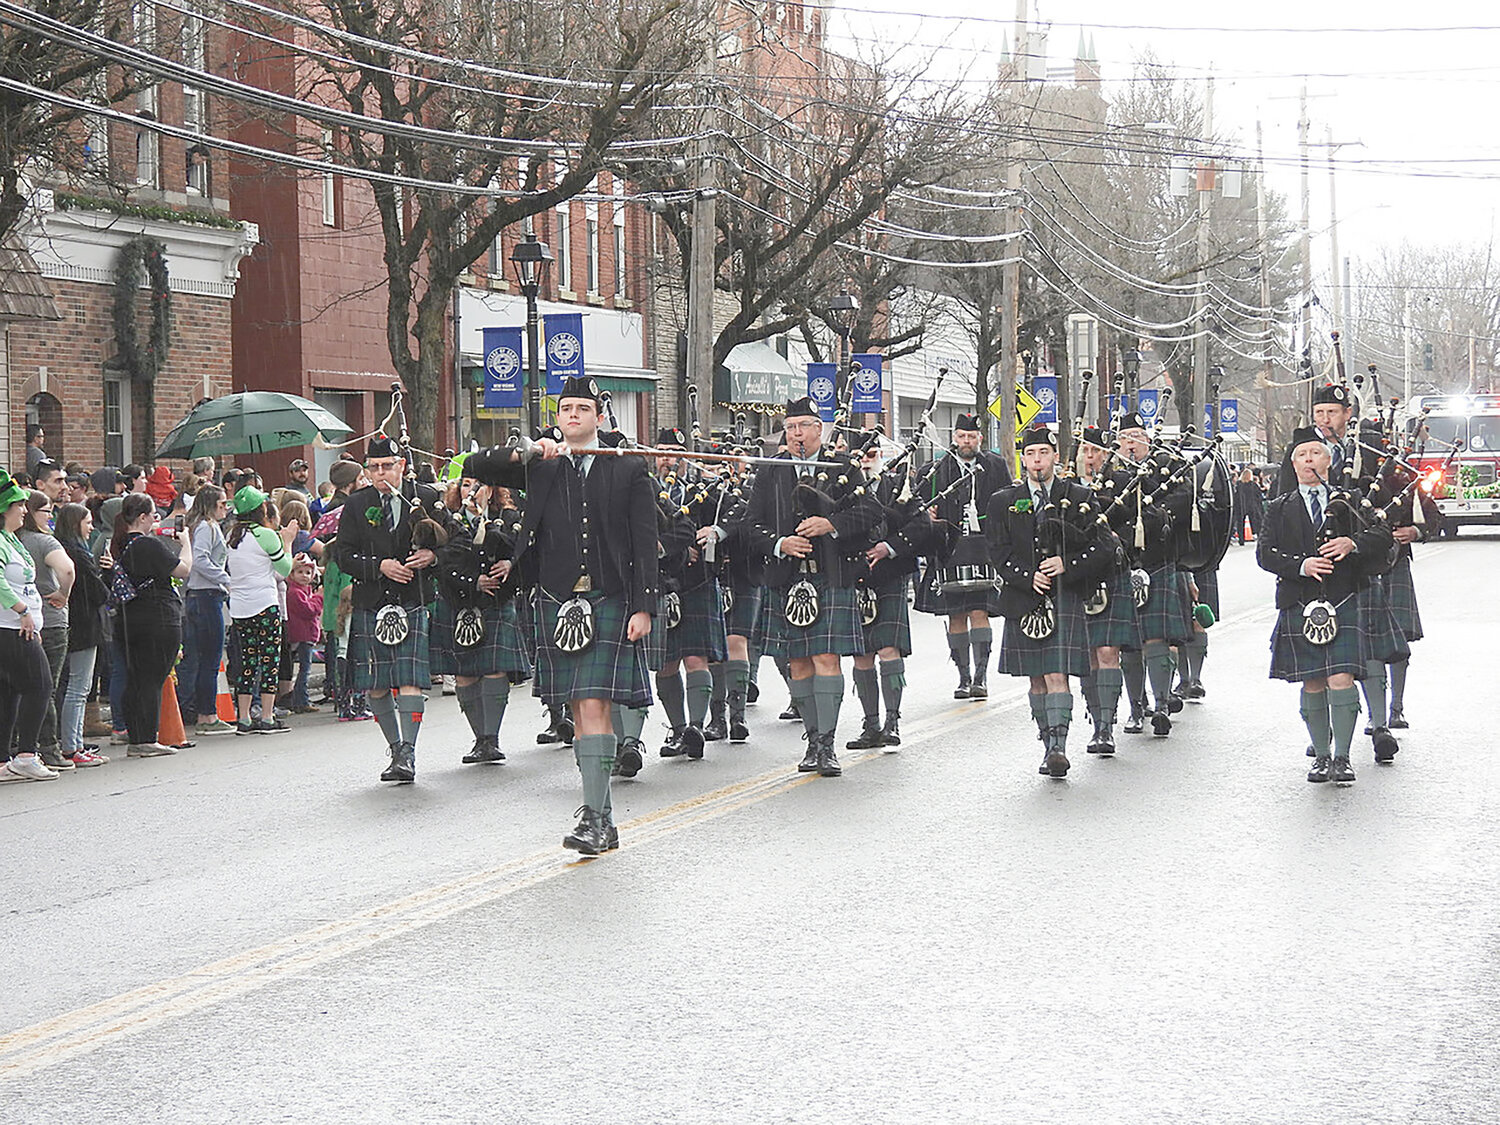 The annual Camden NY Irish Parade returns at 1 p.m. Saturday, March 18 in Camden. Line up is at 11 a.m. at Camden Elementary School, 1 Oswego St.